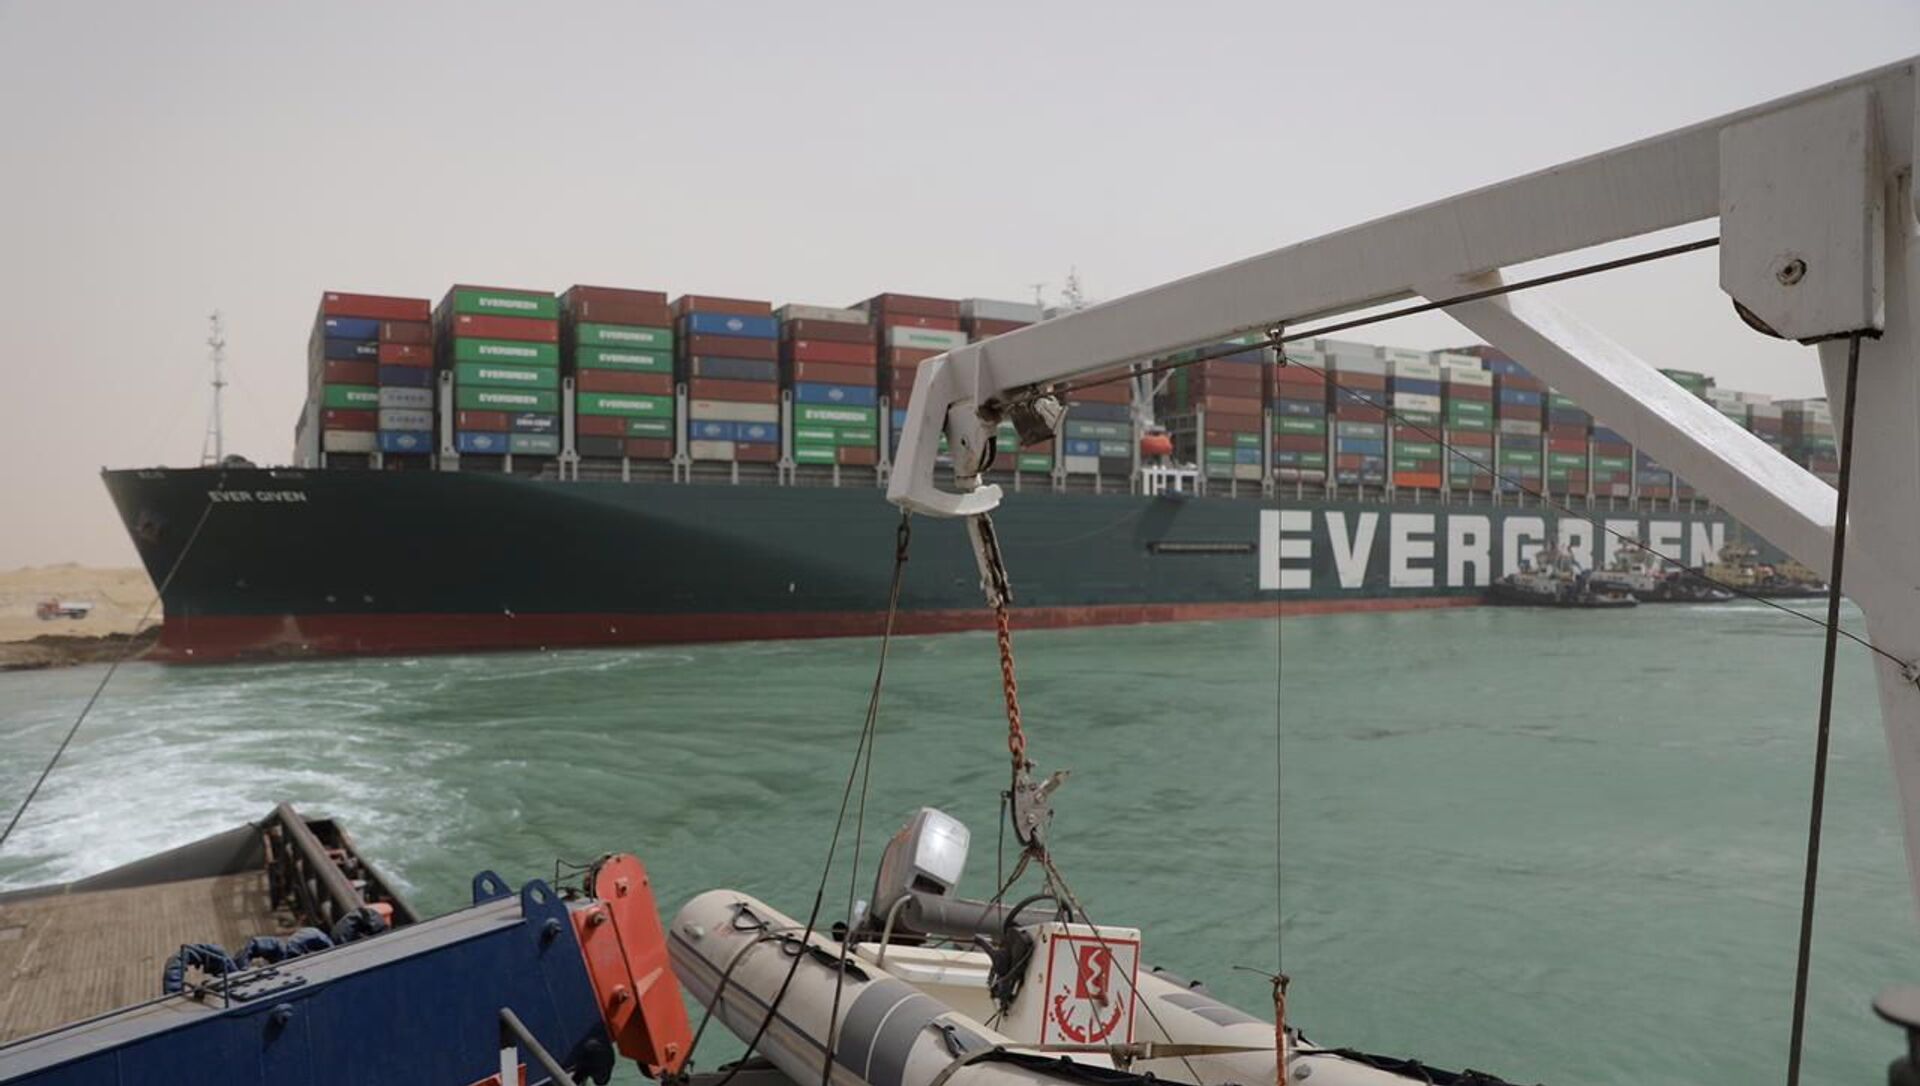 Stranded container ship Ever Given, one of the world's largest container ships, is seen after it ran aground, in Suez Canal, Egypt March 25, 2021 - Sputnik International, 1920, 25.03.2021